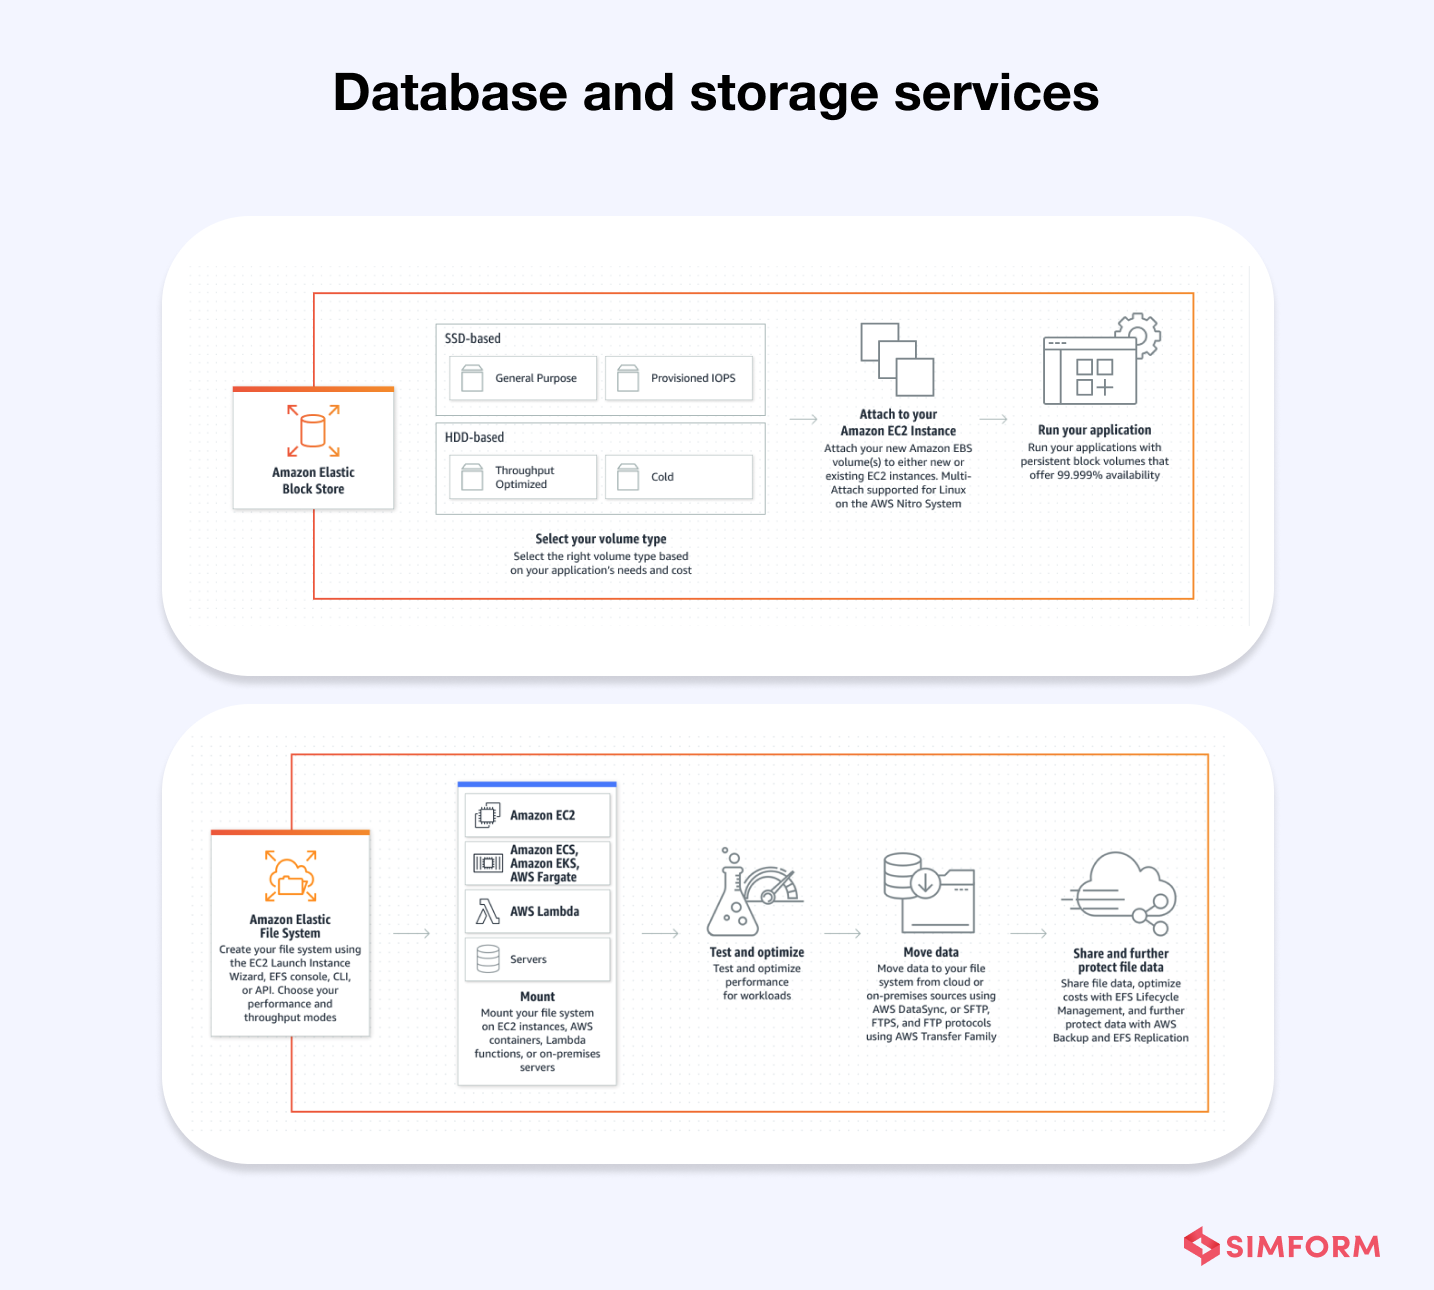 AWS database and storage services